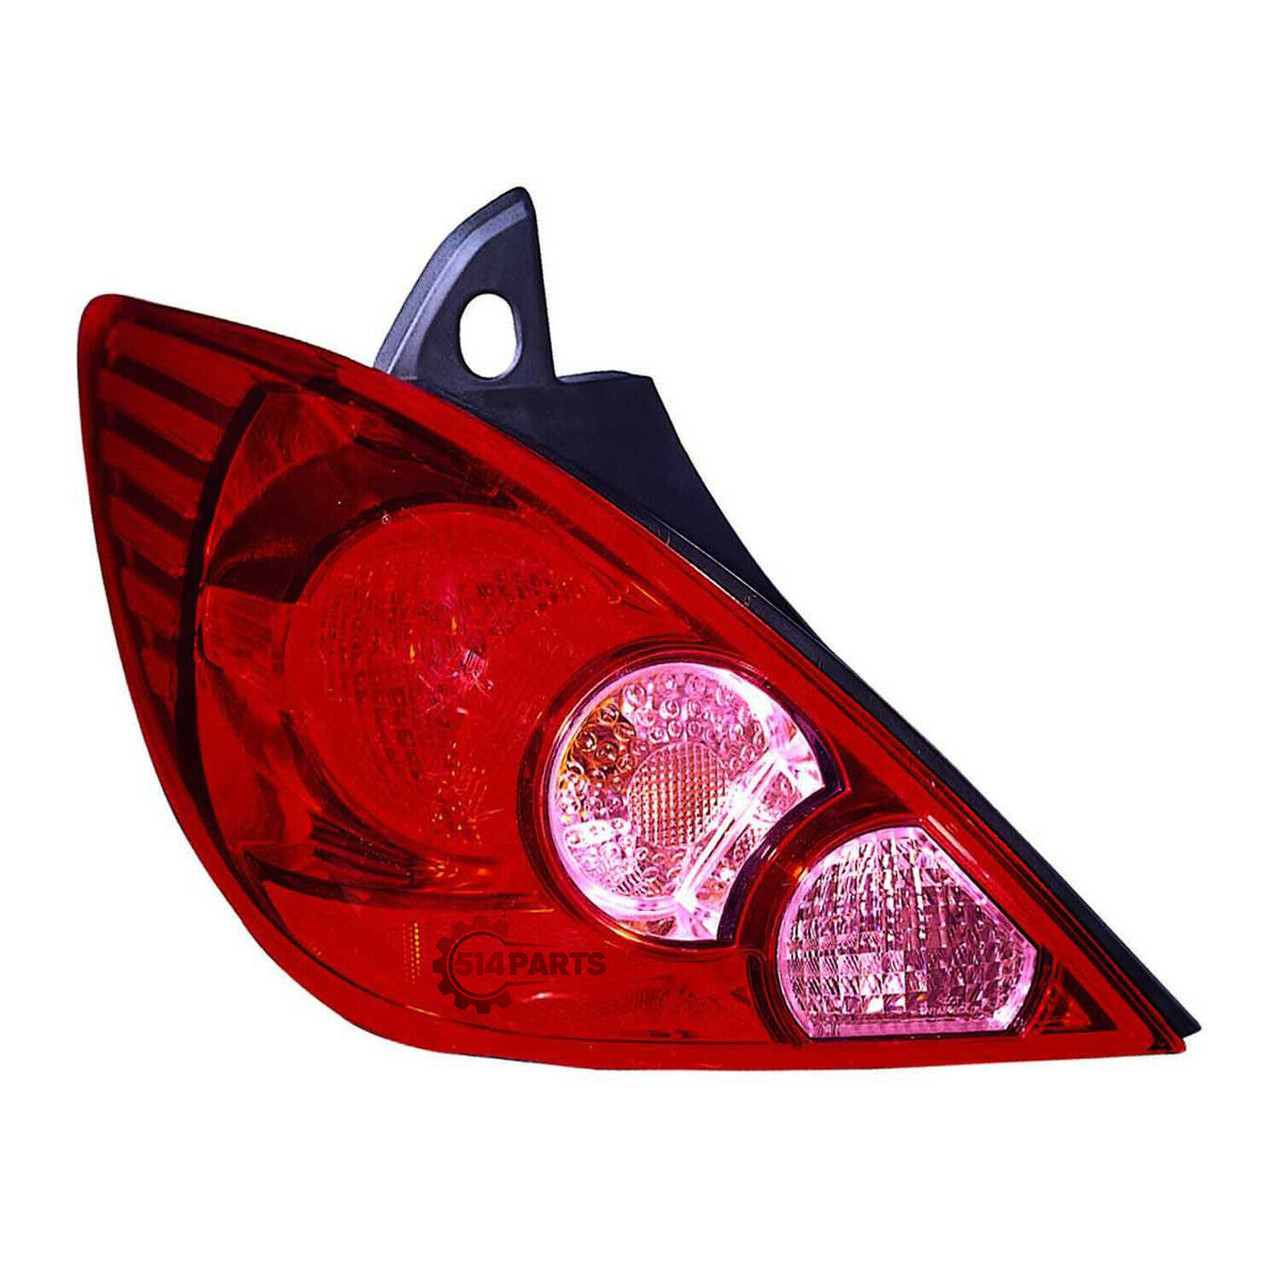 2007 - 2012 NISSAN VERSA Hatchback TAIL LIGHTS High Quality - PHARES ARRIERE Haute Qualite